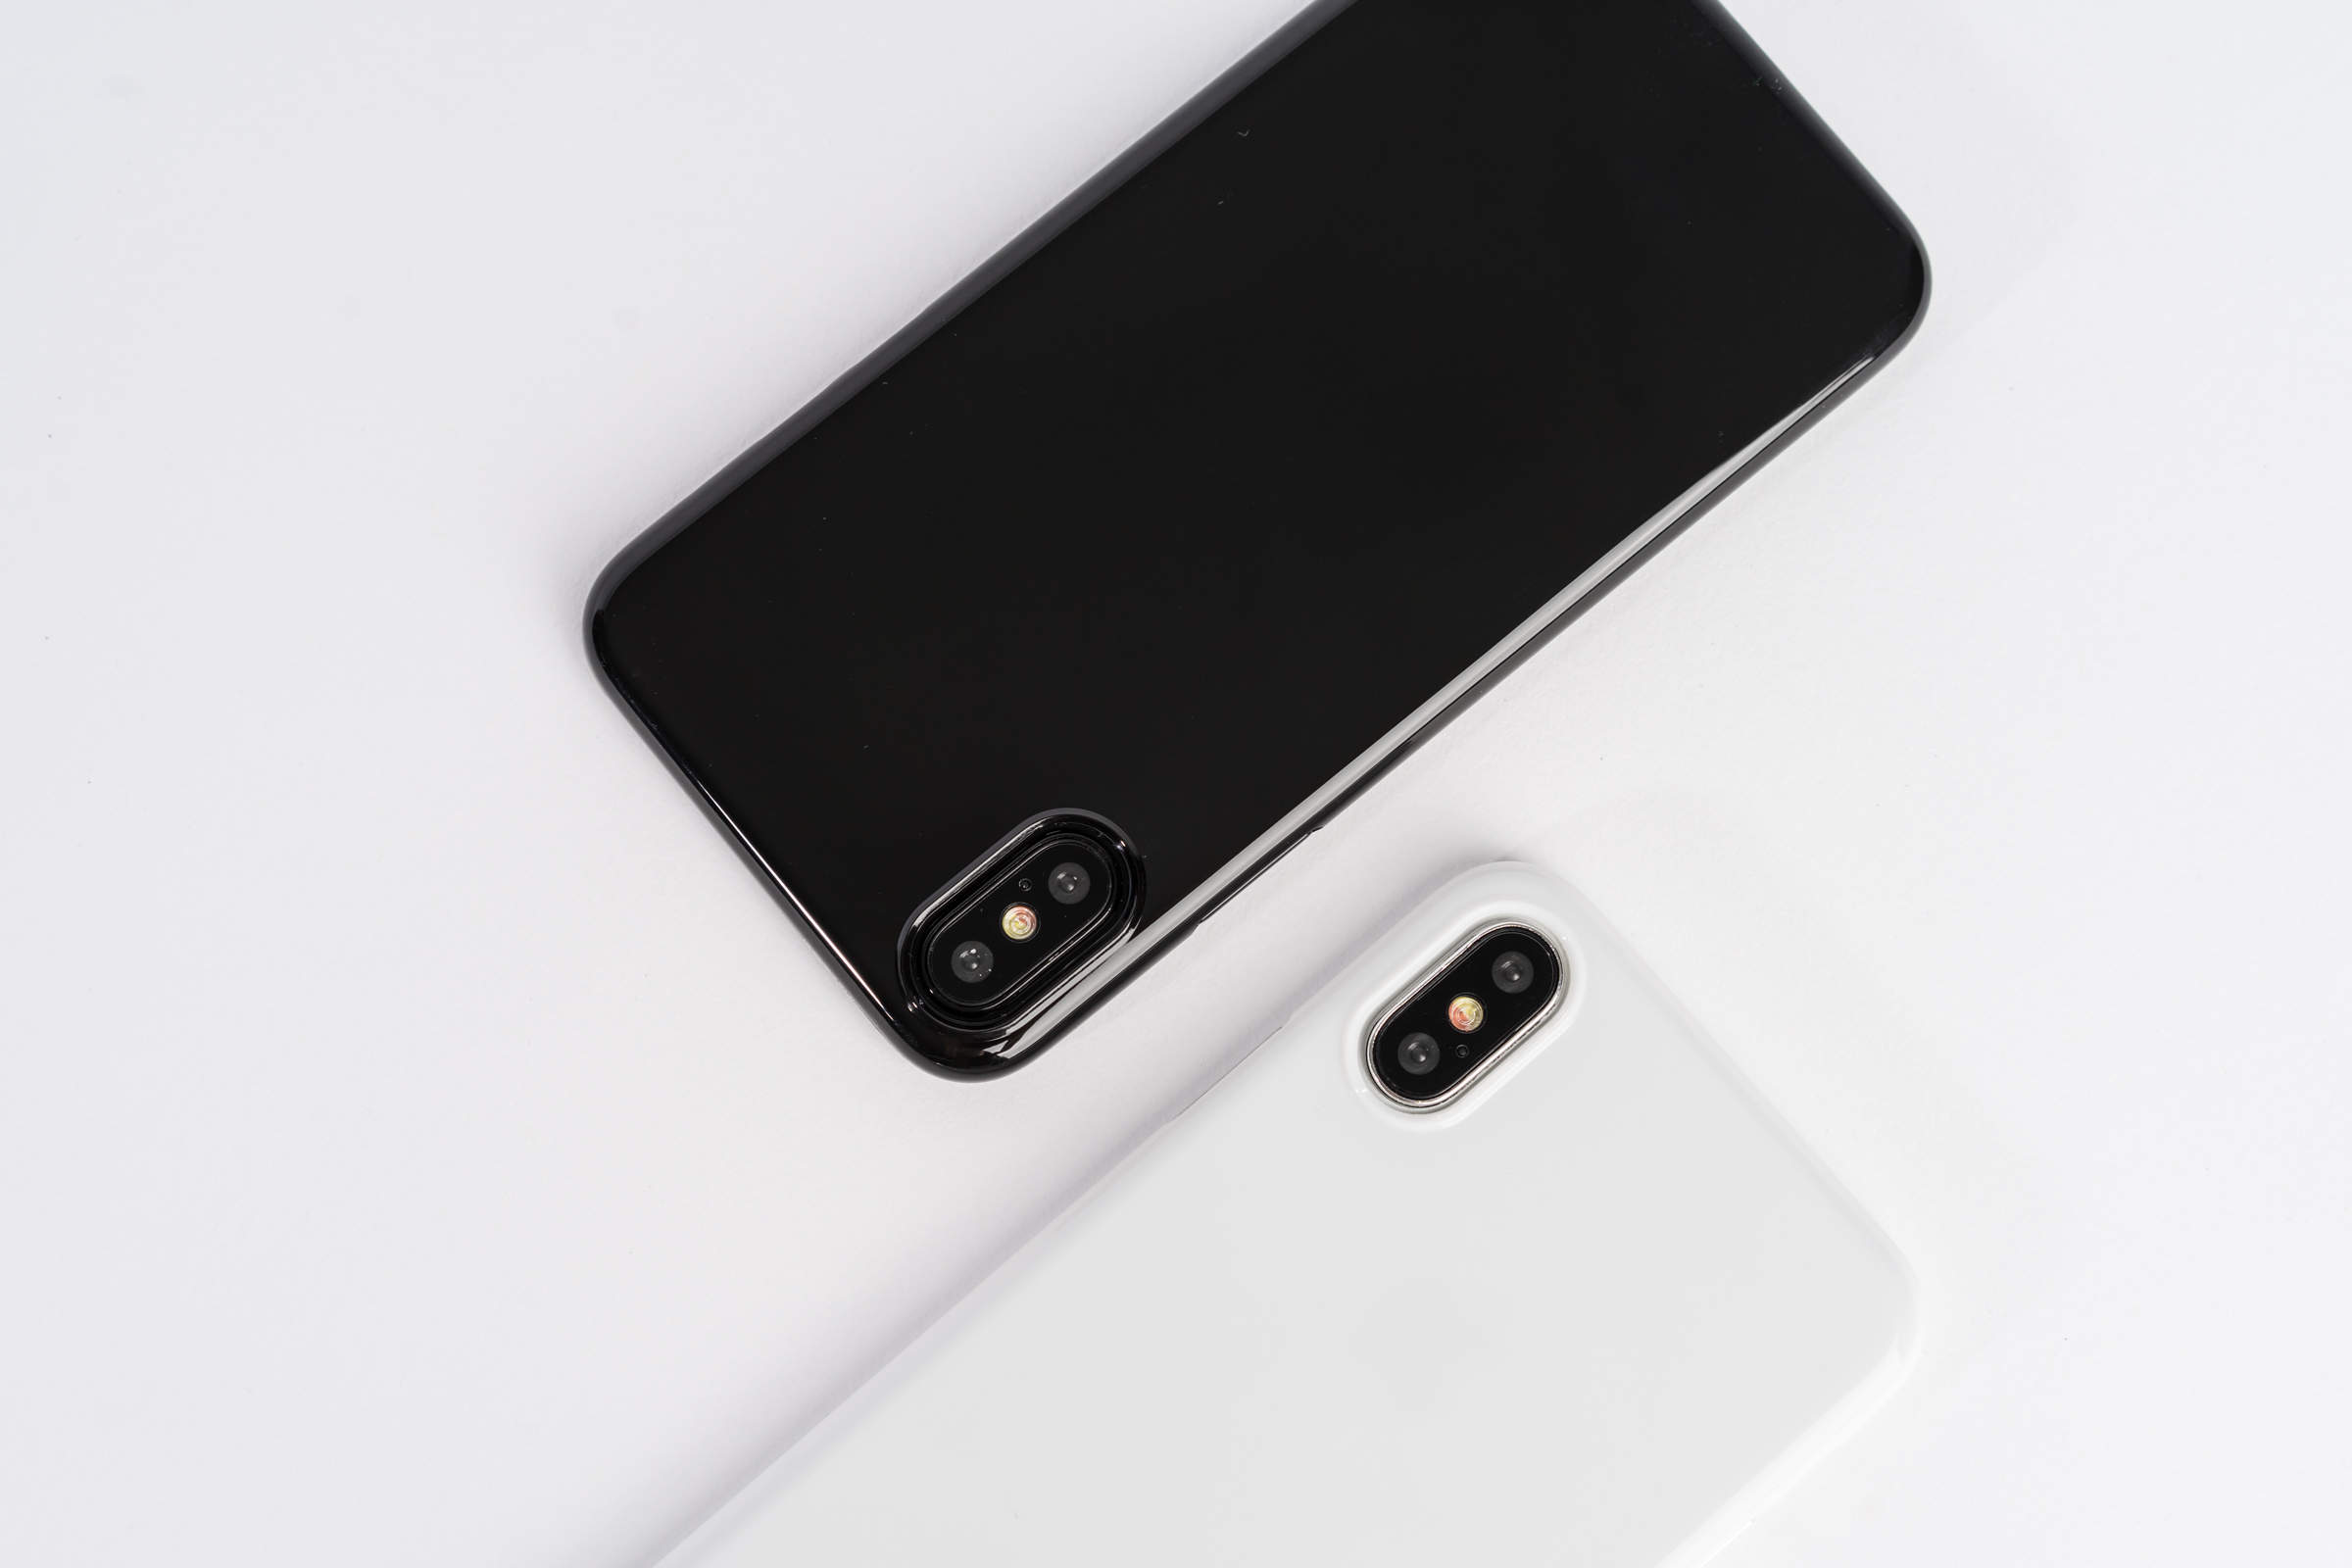 Peel Launches Super Thin Cases for iPhone X, 8, and 8 Plus Phones